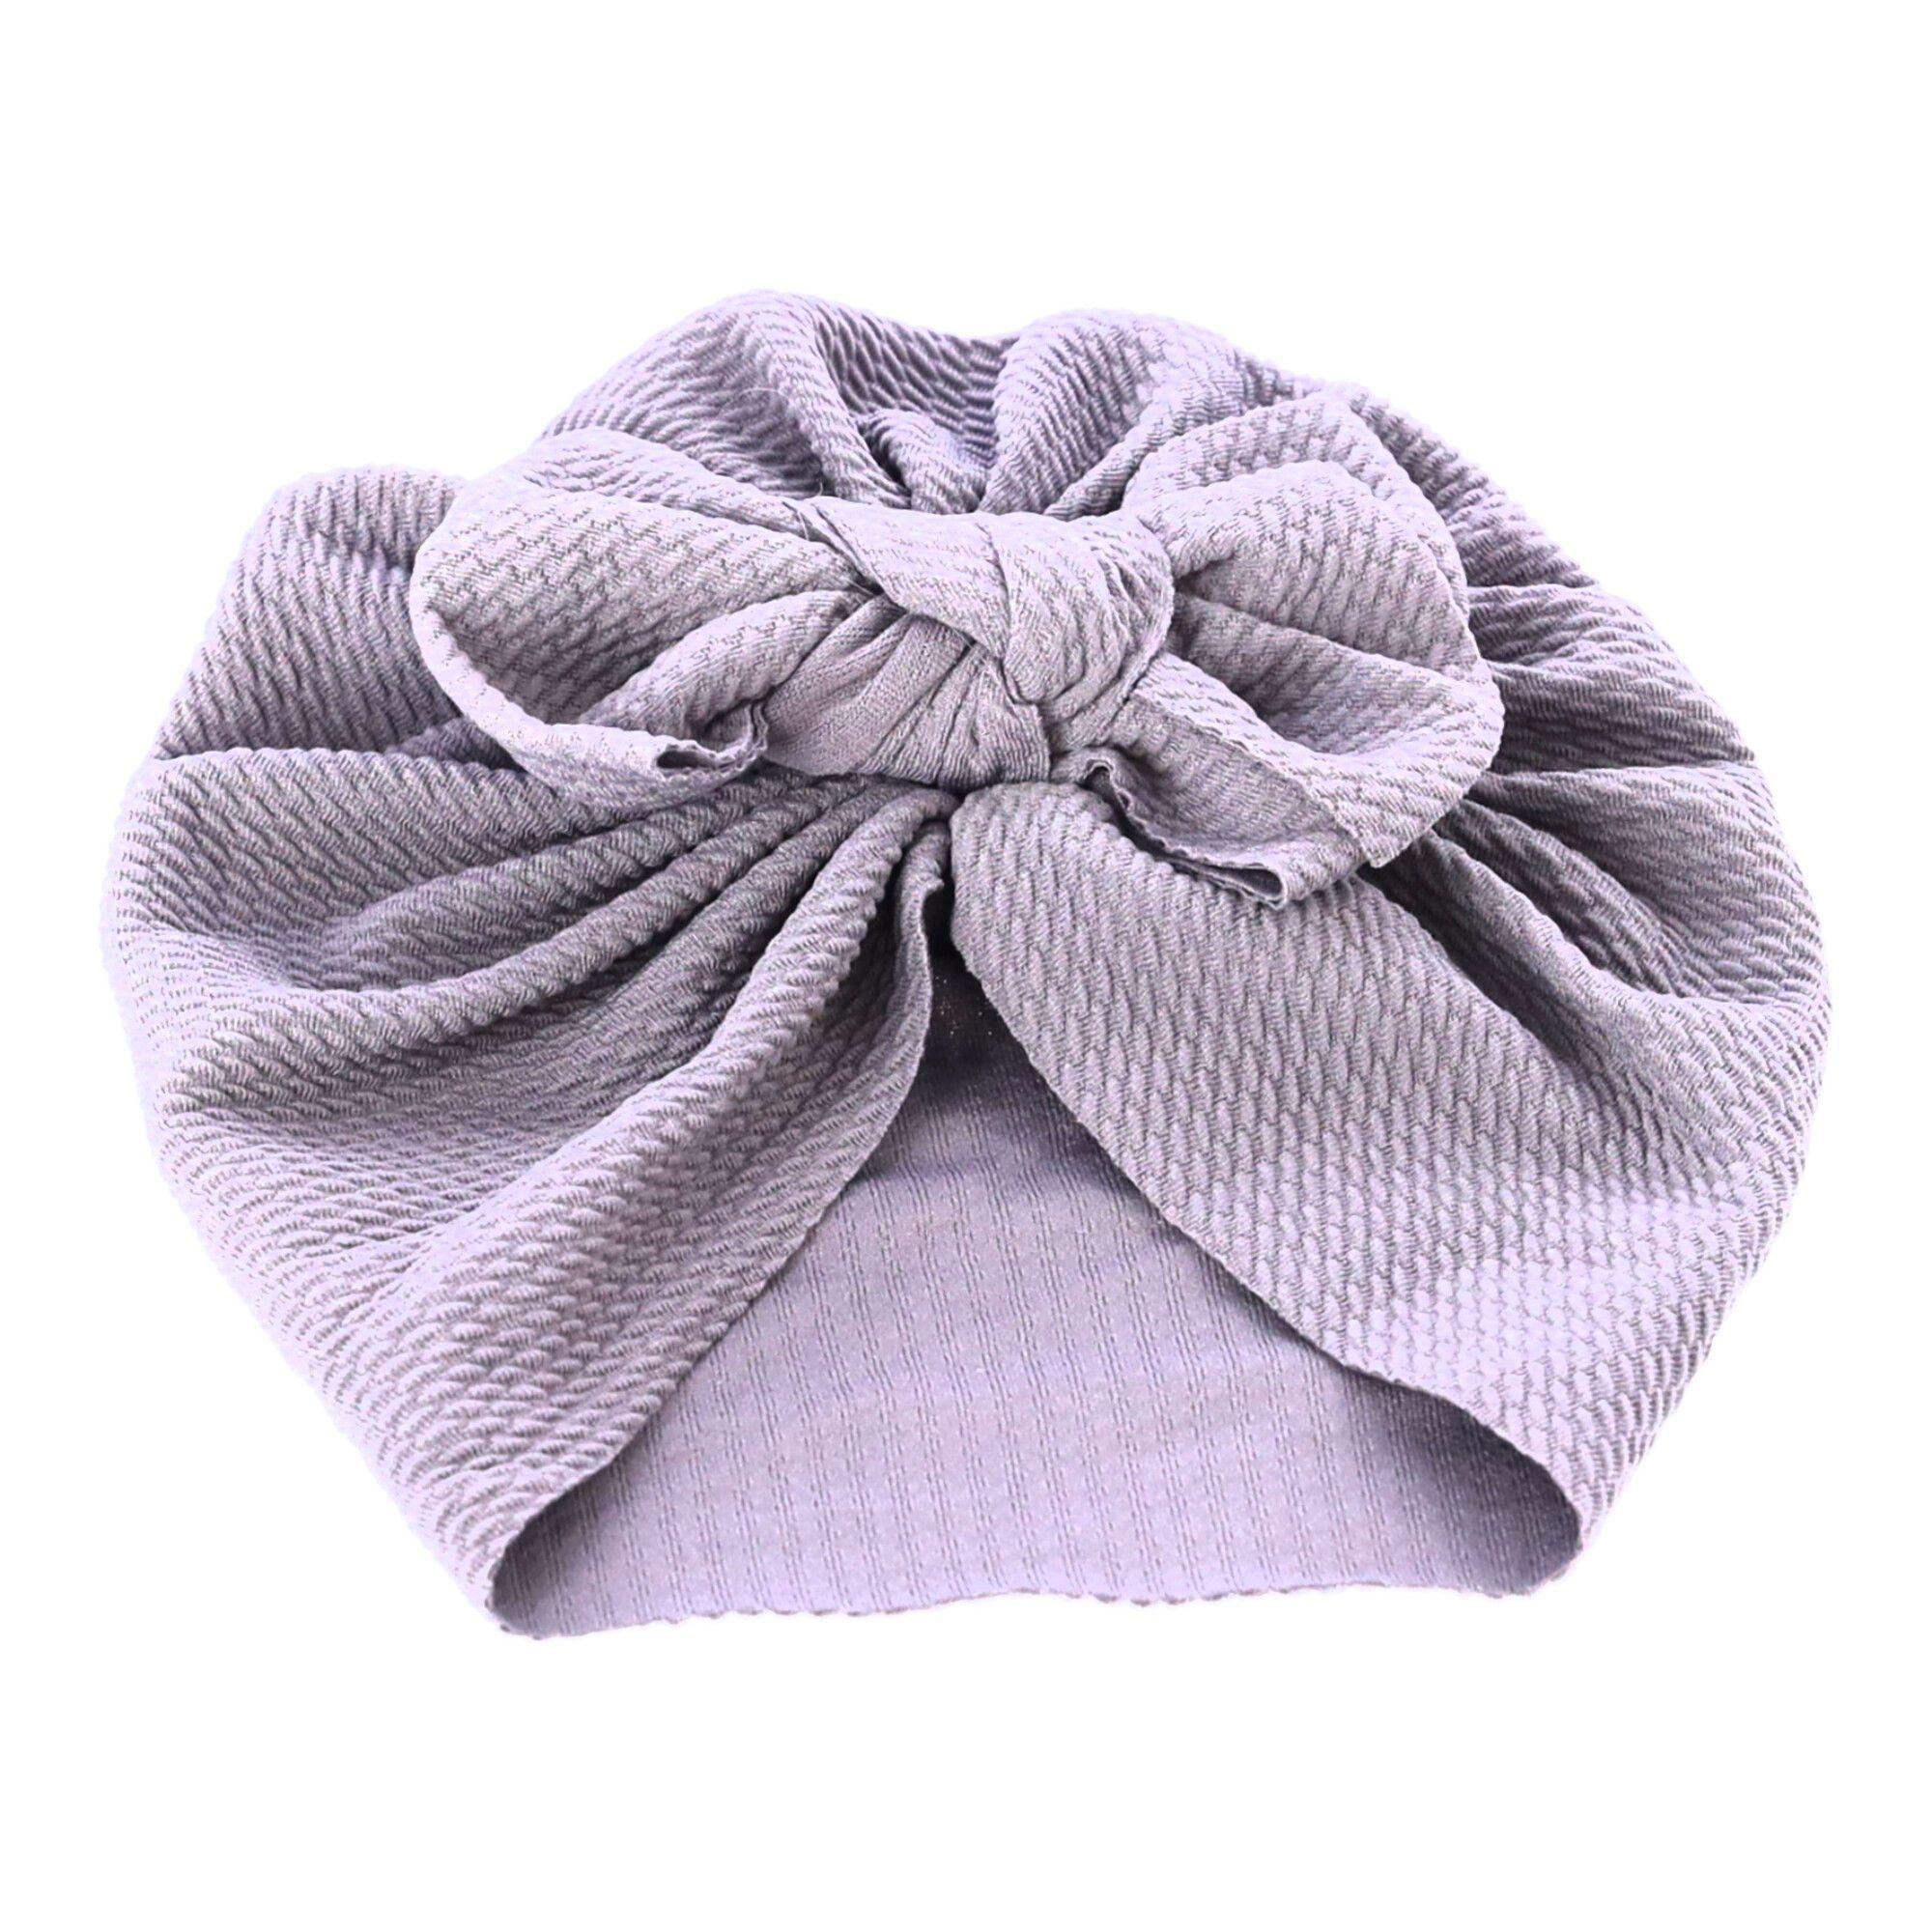 Baby turban with a bow, girl's hat - grey